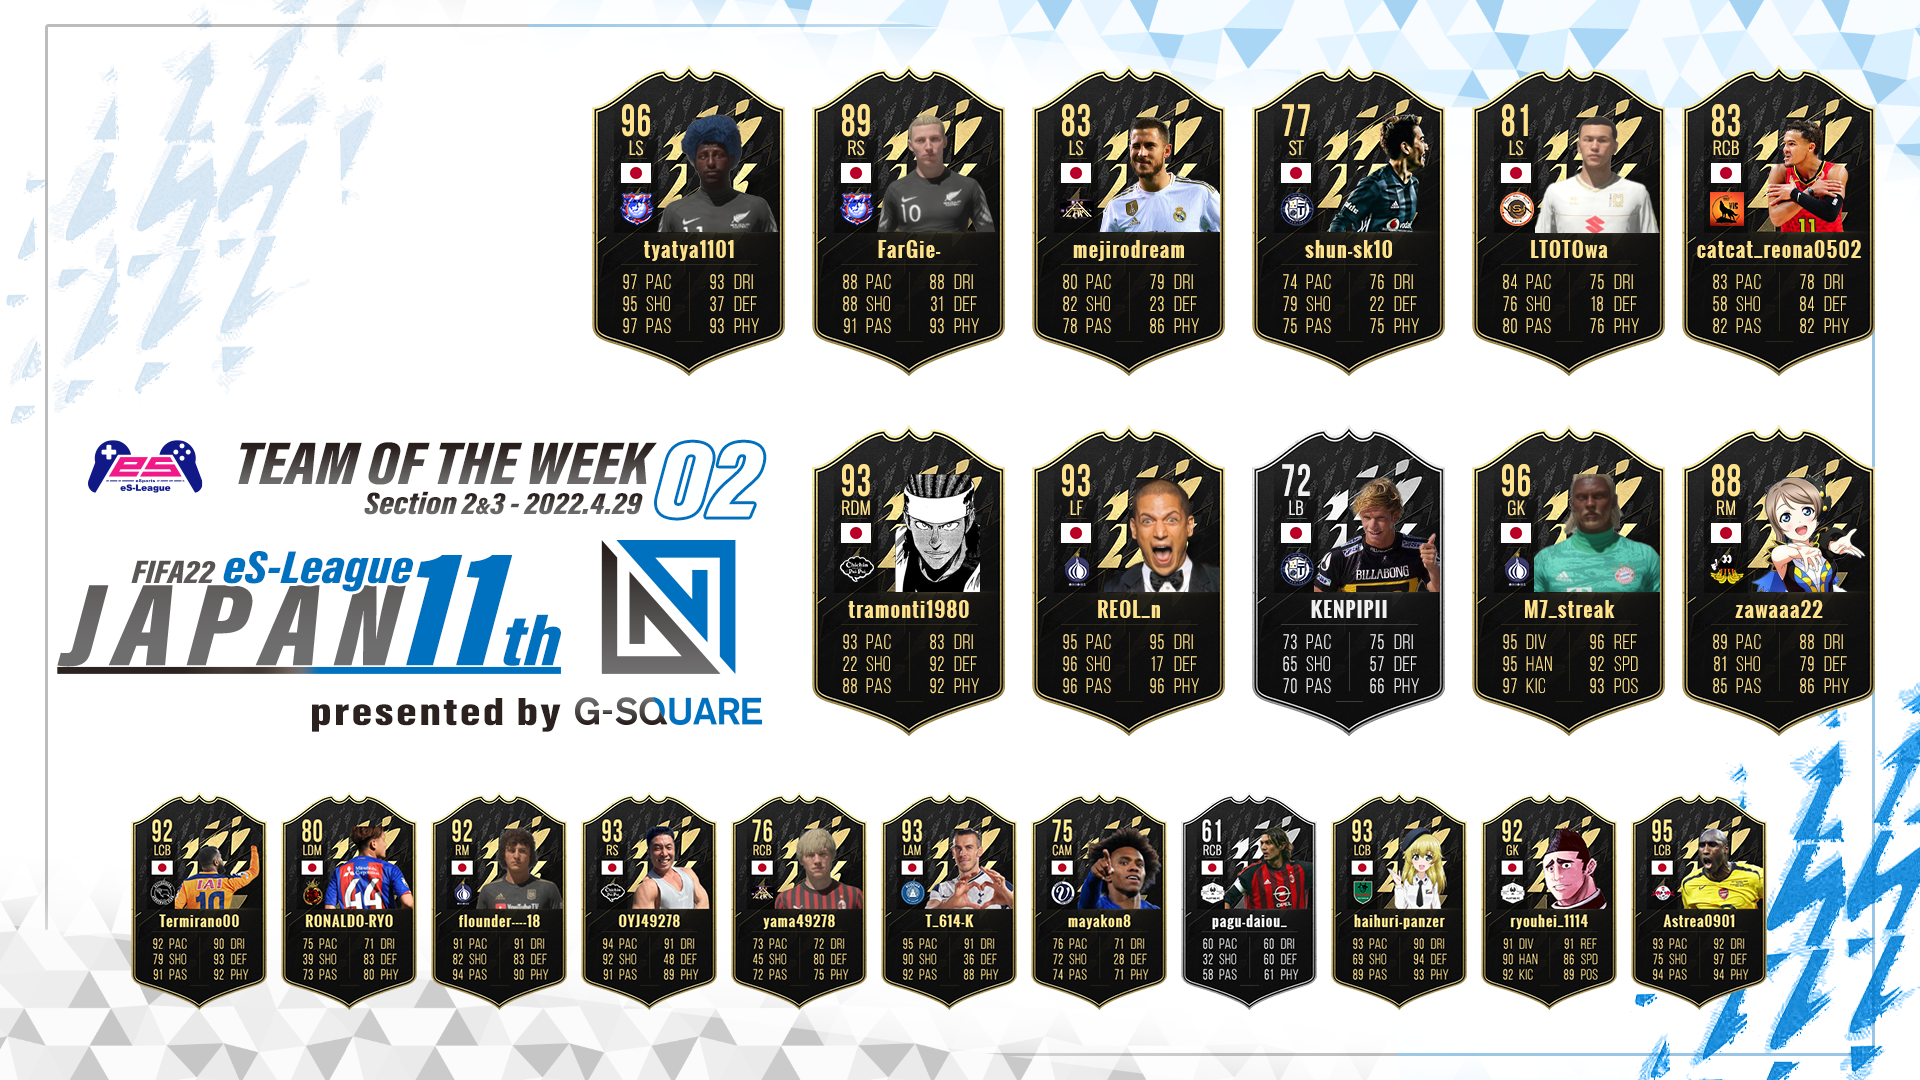 FIFA22 eS-League JAPAN 11th presented by G-SQUARE TOTW02